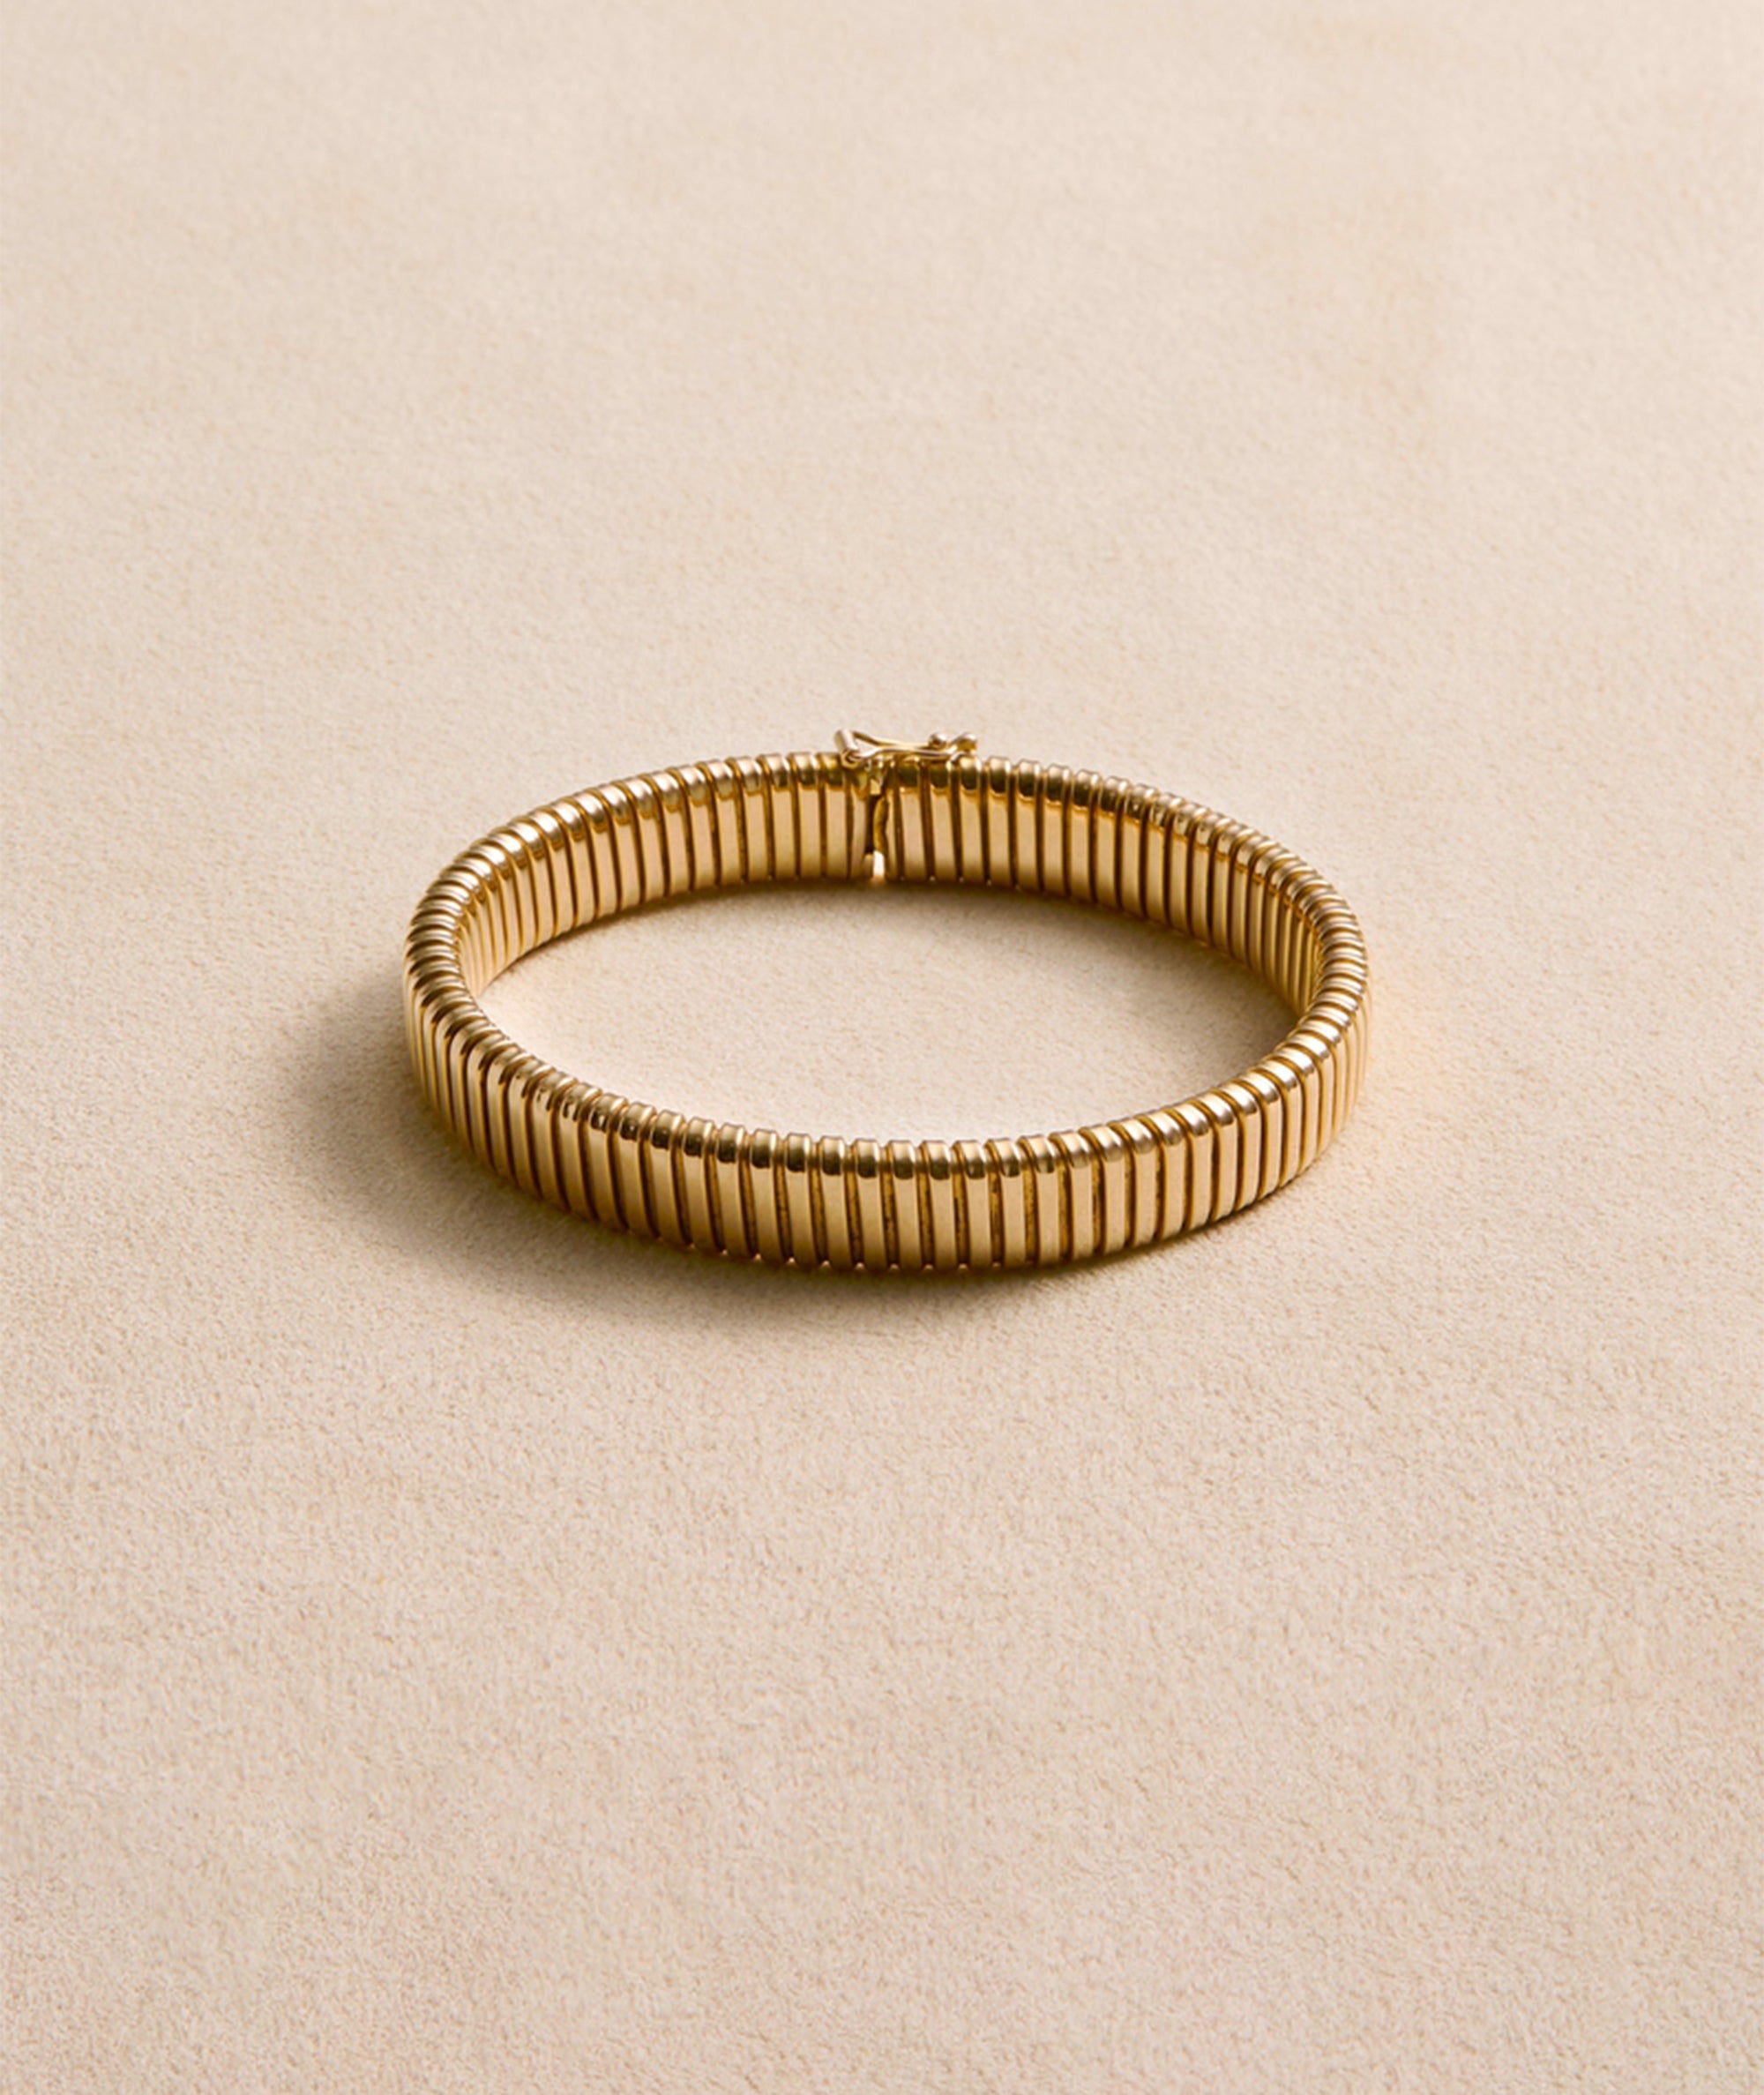 Vintage bracelet in yellow gold. Exclusively sourced for EREDE Curated.